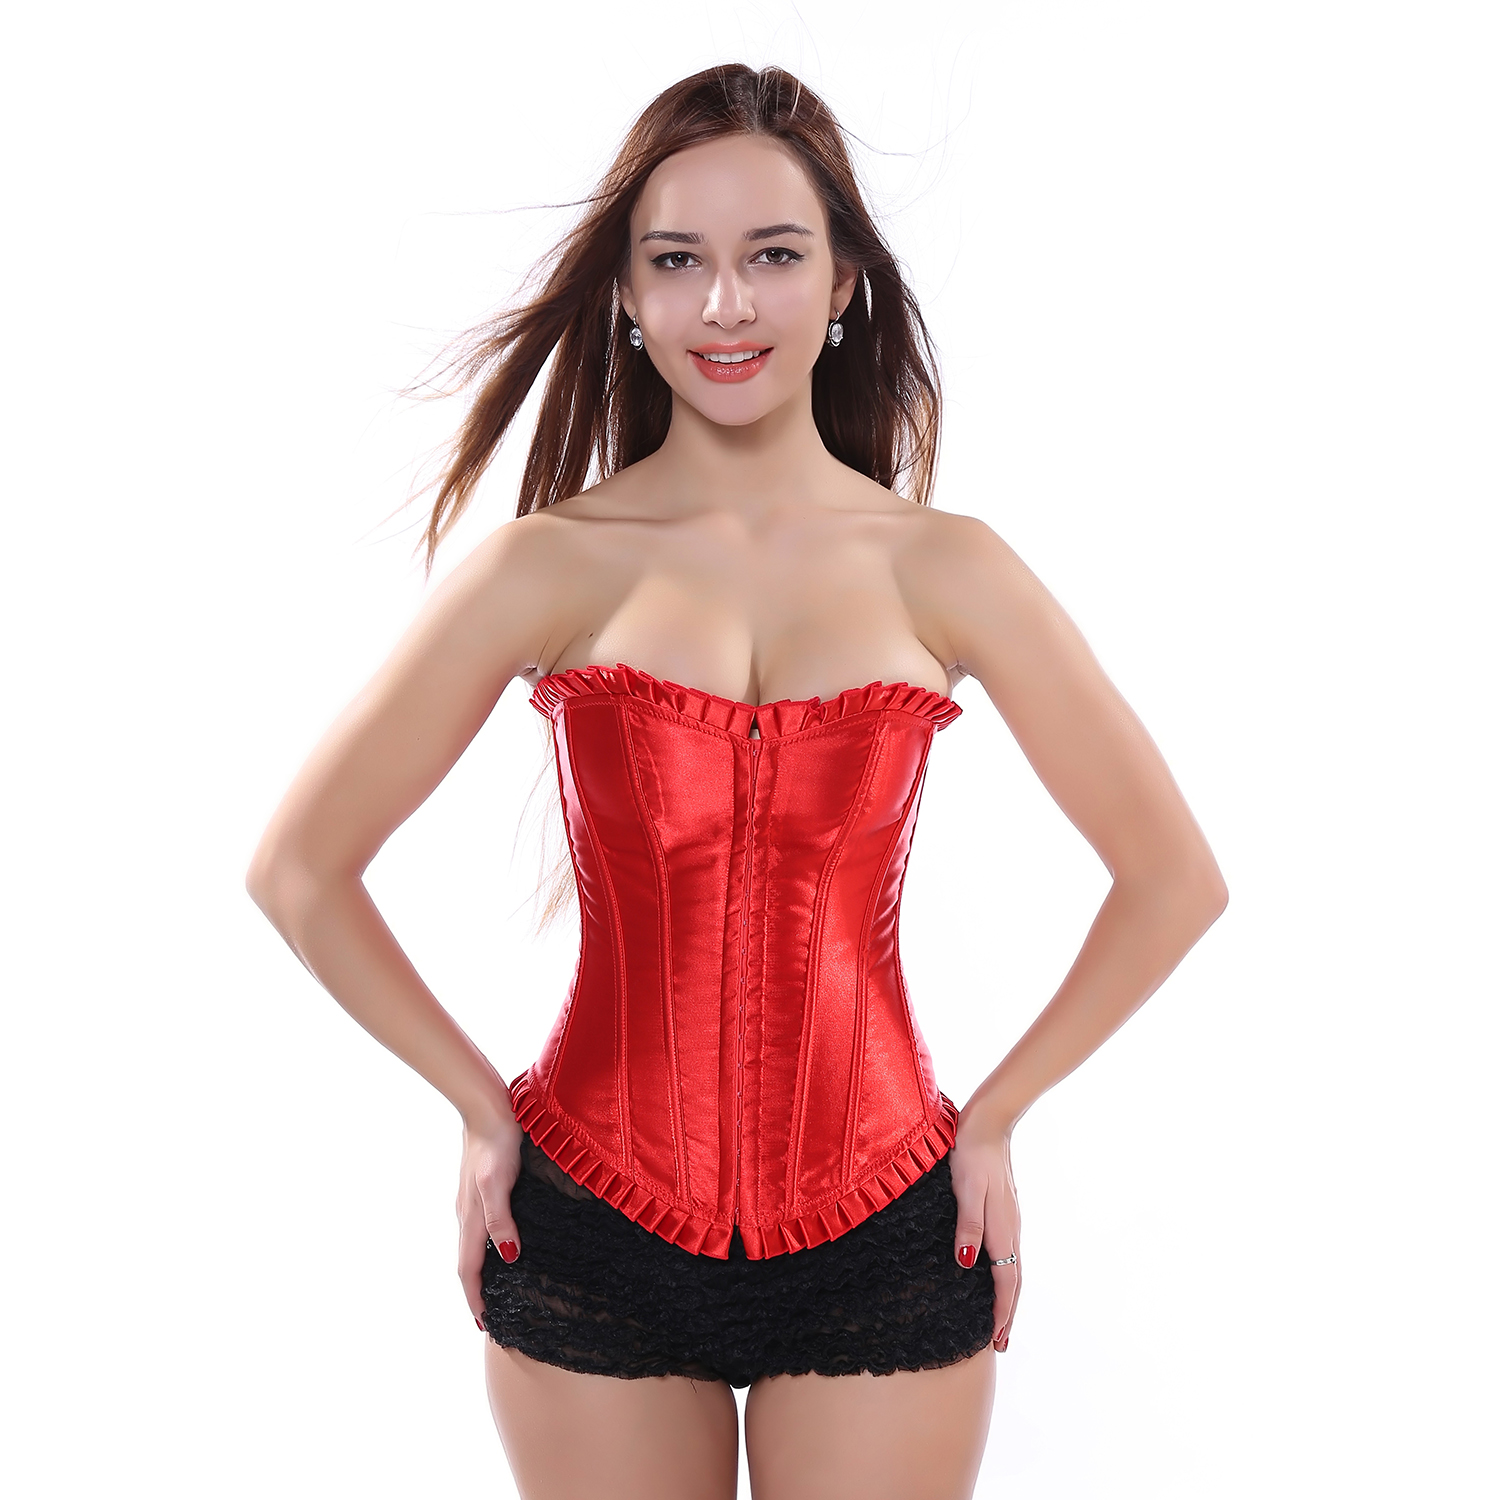 Red-Corsets and Bustiers Burlesque Masquerade Tight Lace Corselet Top for Women Sexy Plus Size Push Up Boned Carnival Party Clubwear